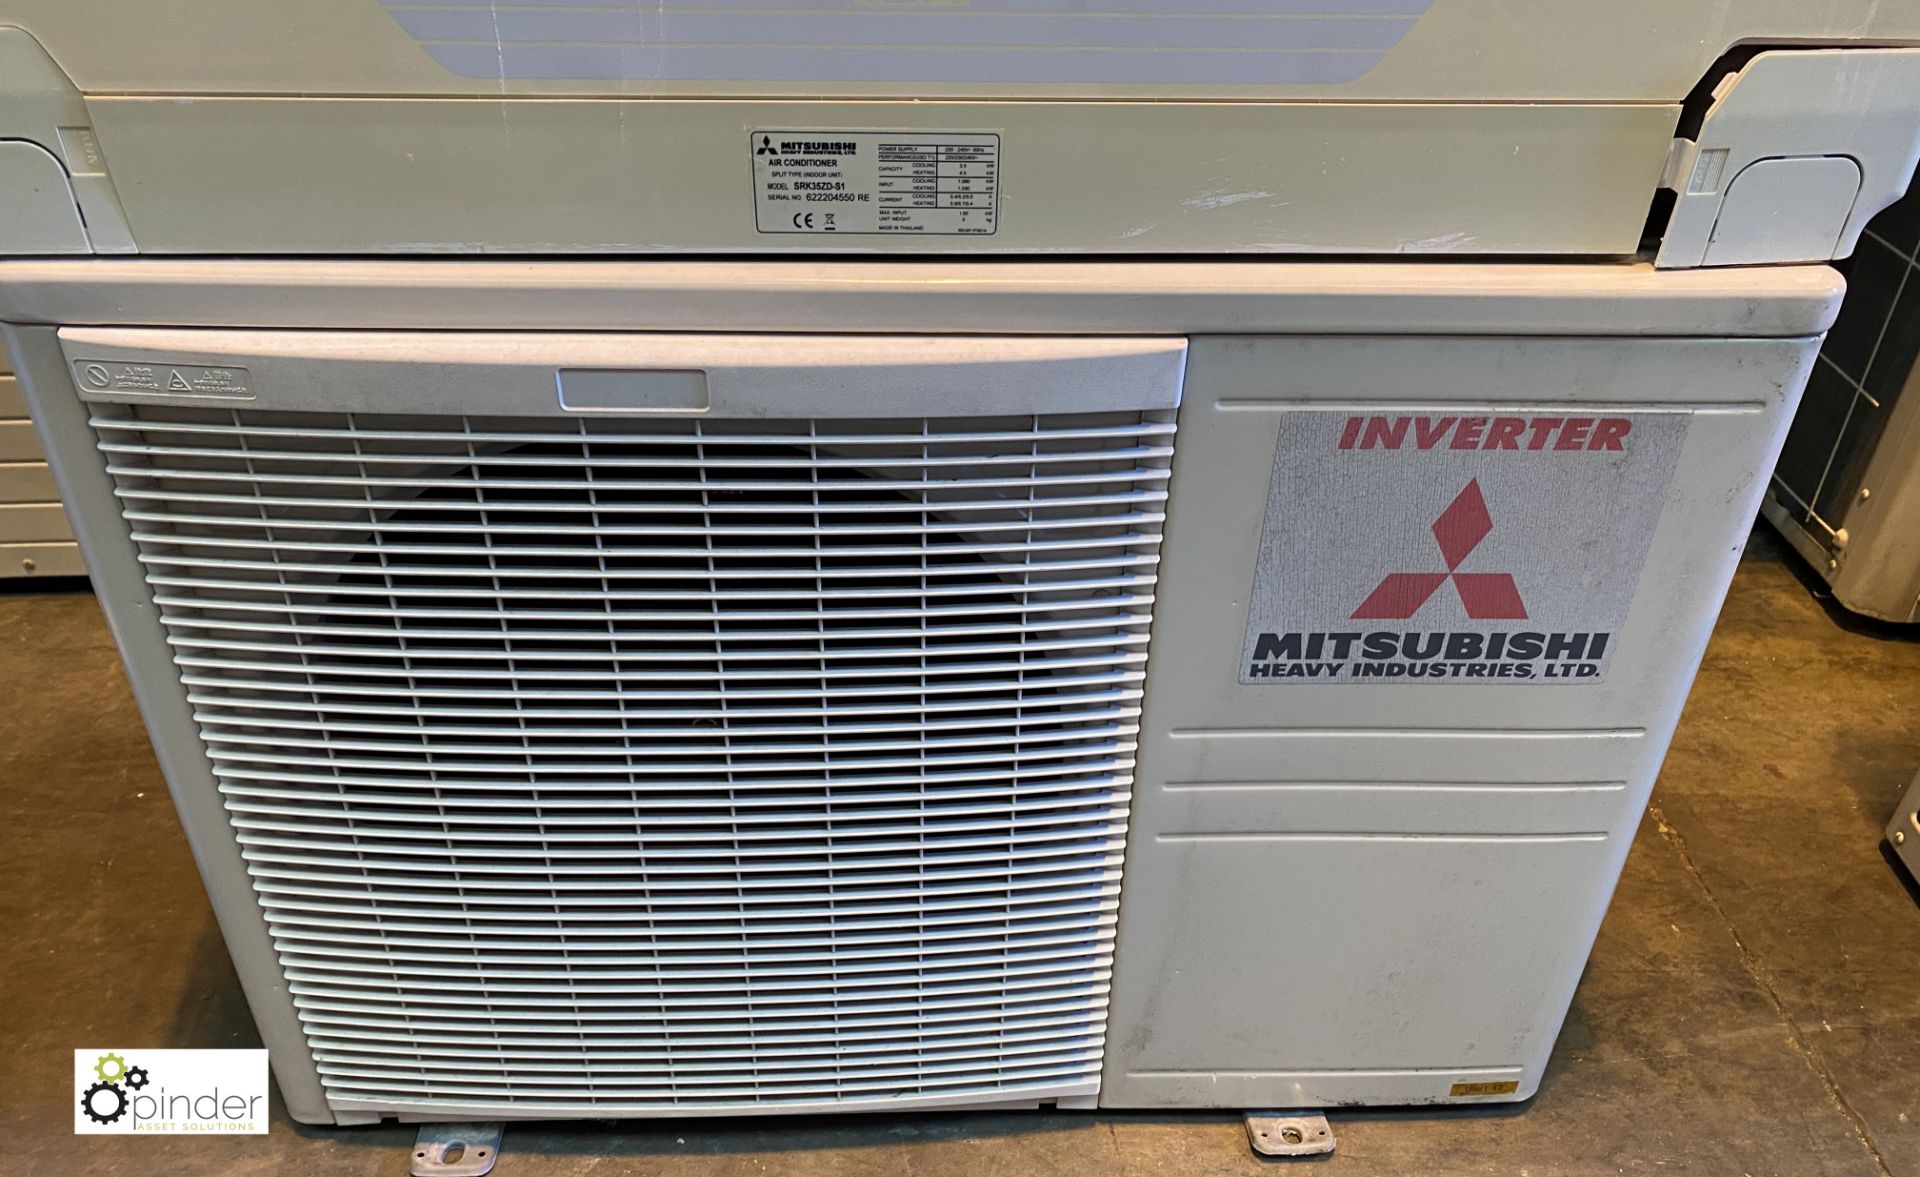 Mitsubishi SRC35ZGX-S Air Conditioning Unit, with Mitsubishi SRK35ZD-S1 wall mounted inverter - Image 2 of 5